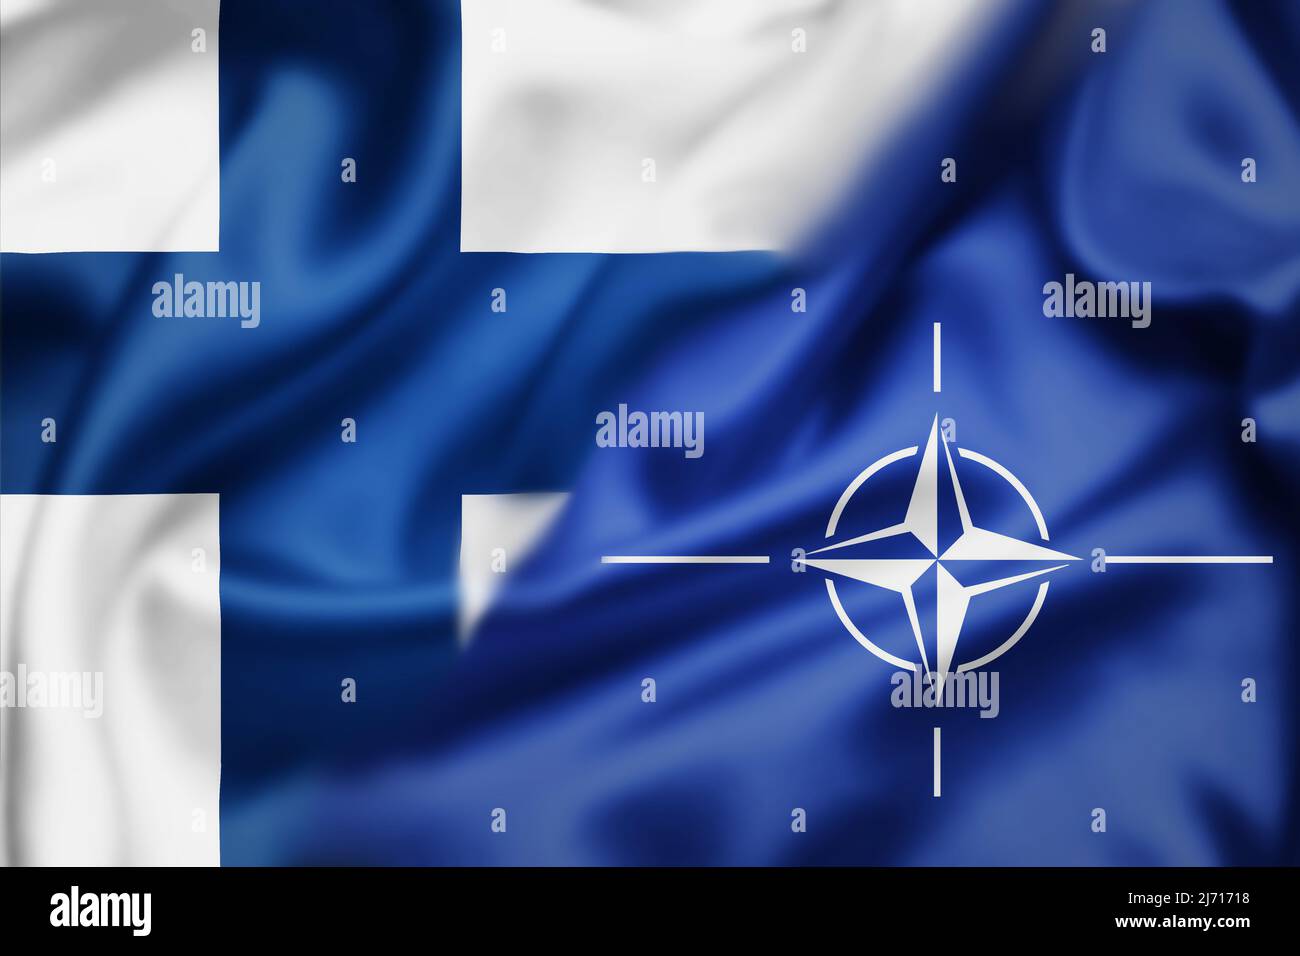 Grunge flags of Russian Federation and NATO divided by barb wire illustration, concept of tense relations between west and Russia Stock Photo